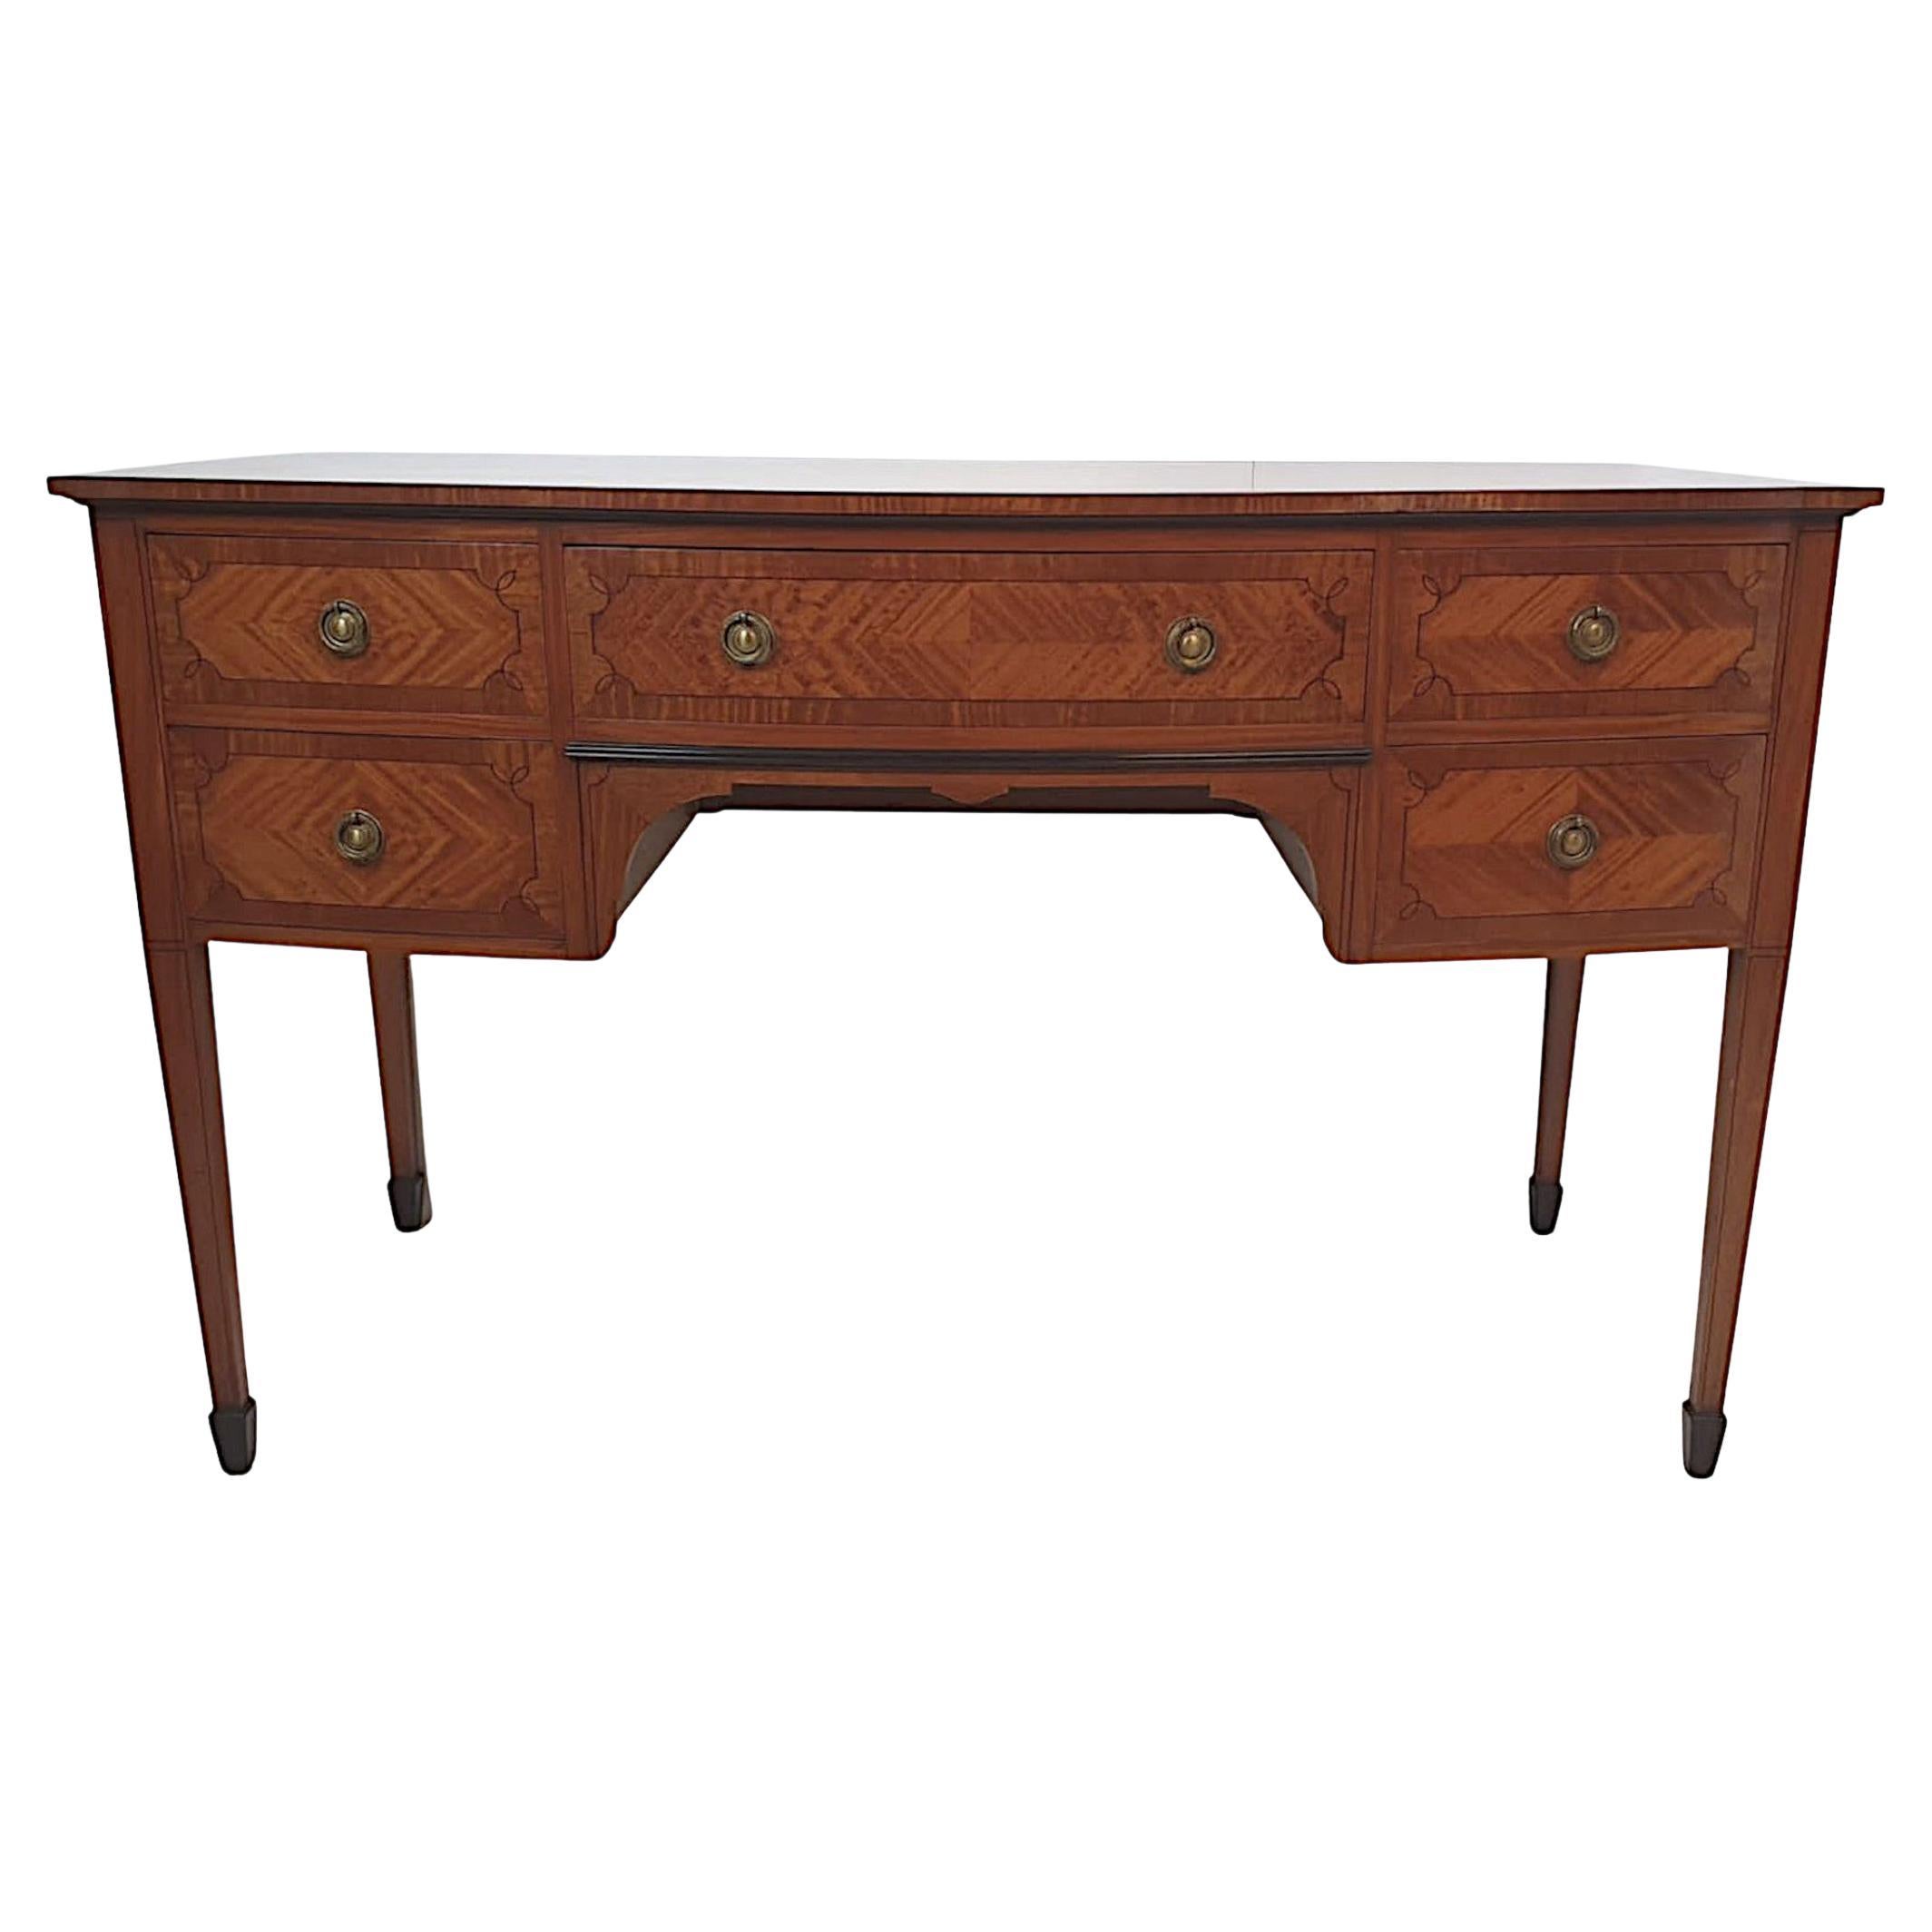 Very Fine Edwardian Satinwood Writing Desk or Dressing Table For Sale